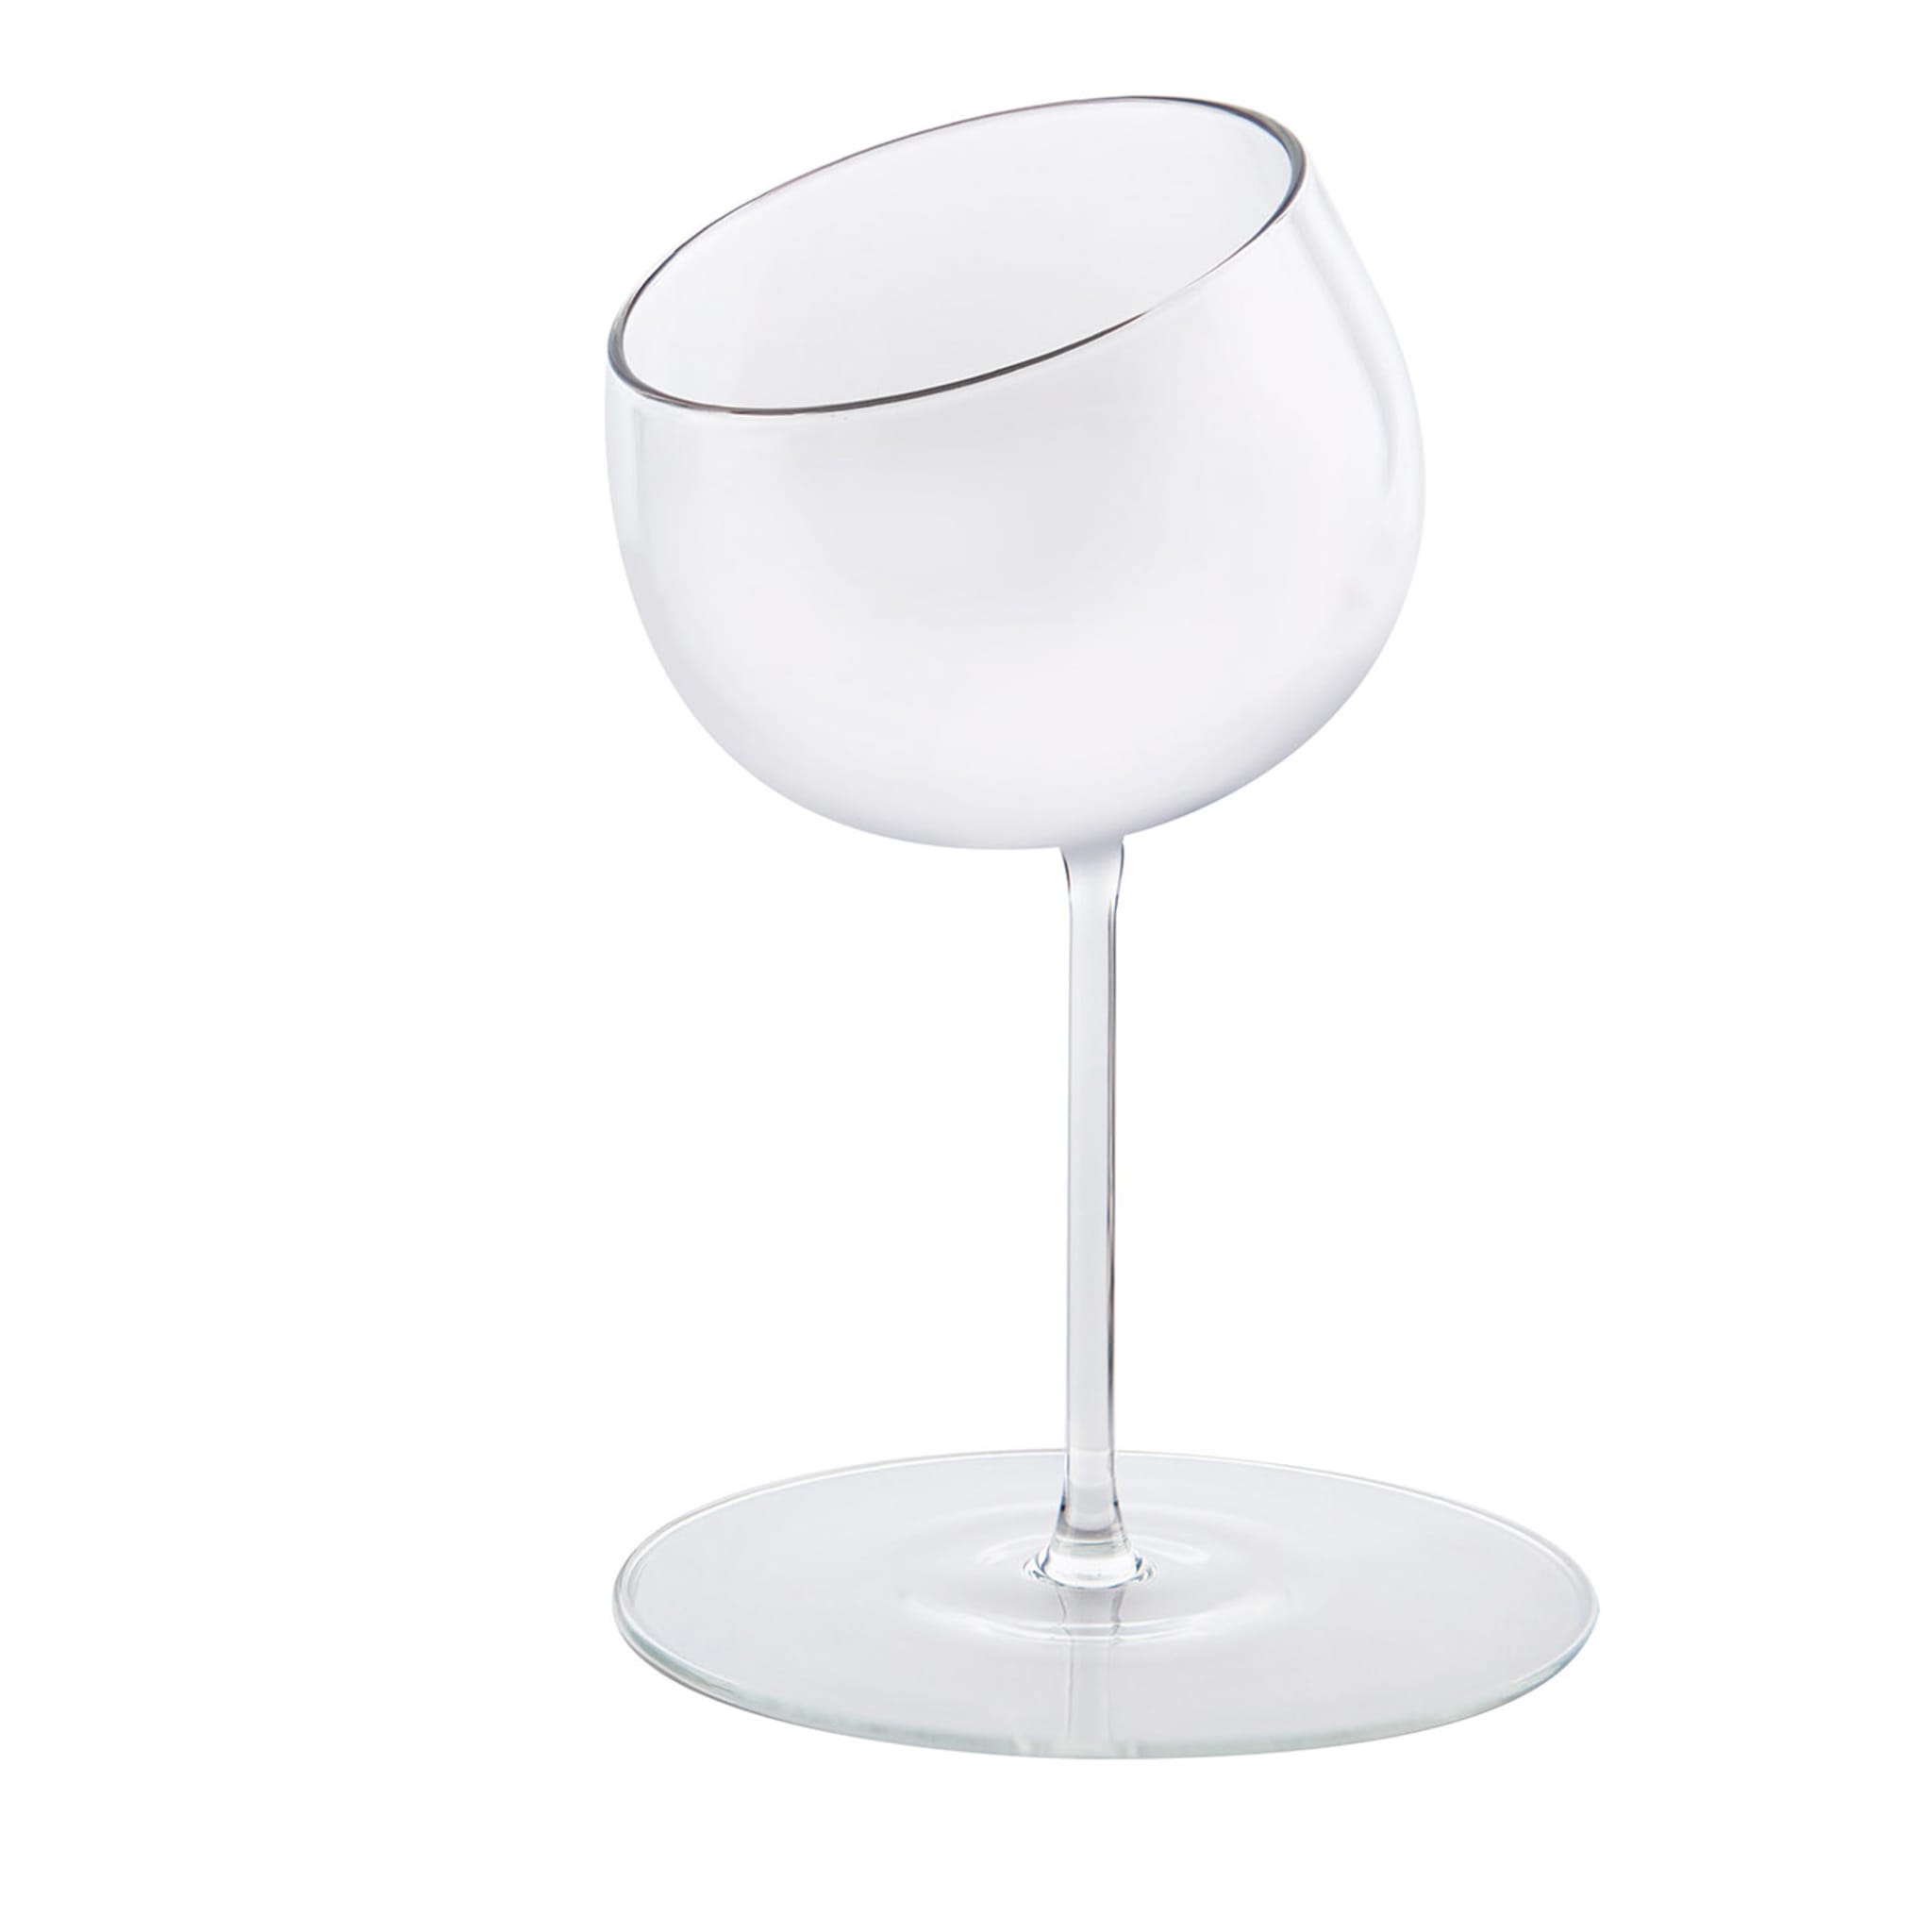 Chino Set of 2 Cocktail Glasses by Daniele Buschi - Main view